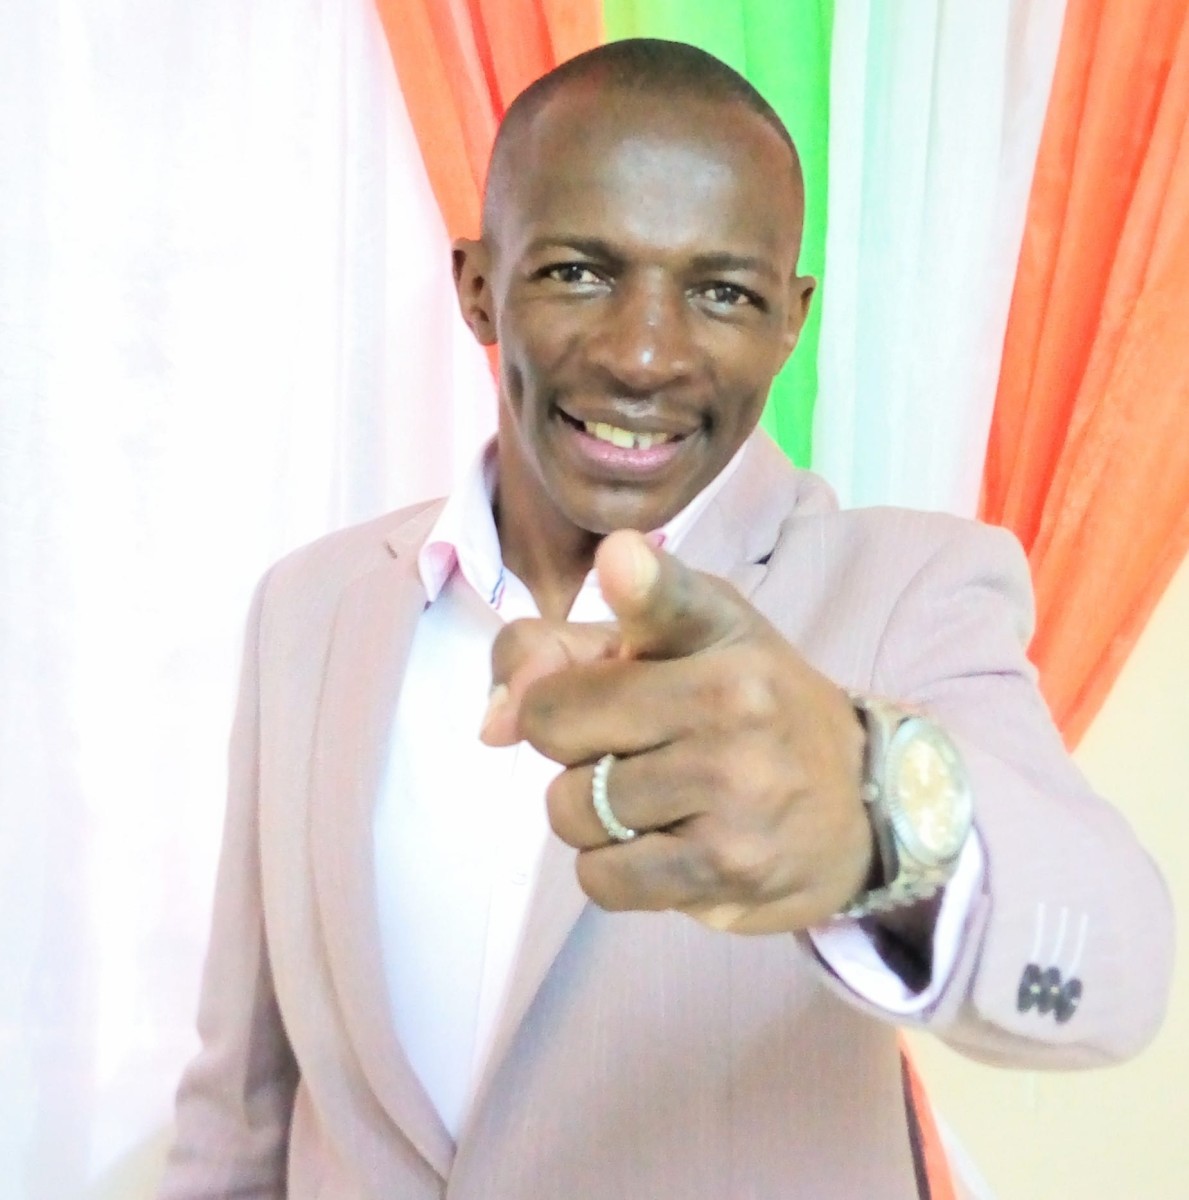 How Jesus Christ Visited Me in a Vision and Transformed My Pitiful Lifestyle- Former Gangster Now Pastor